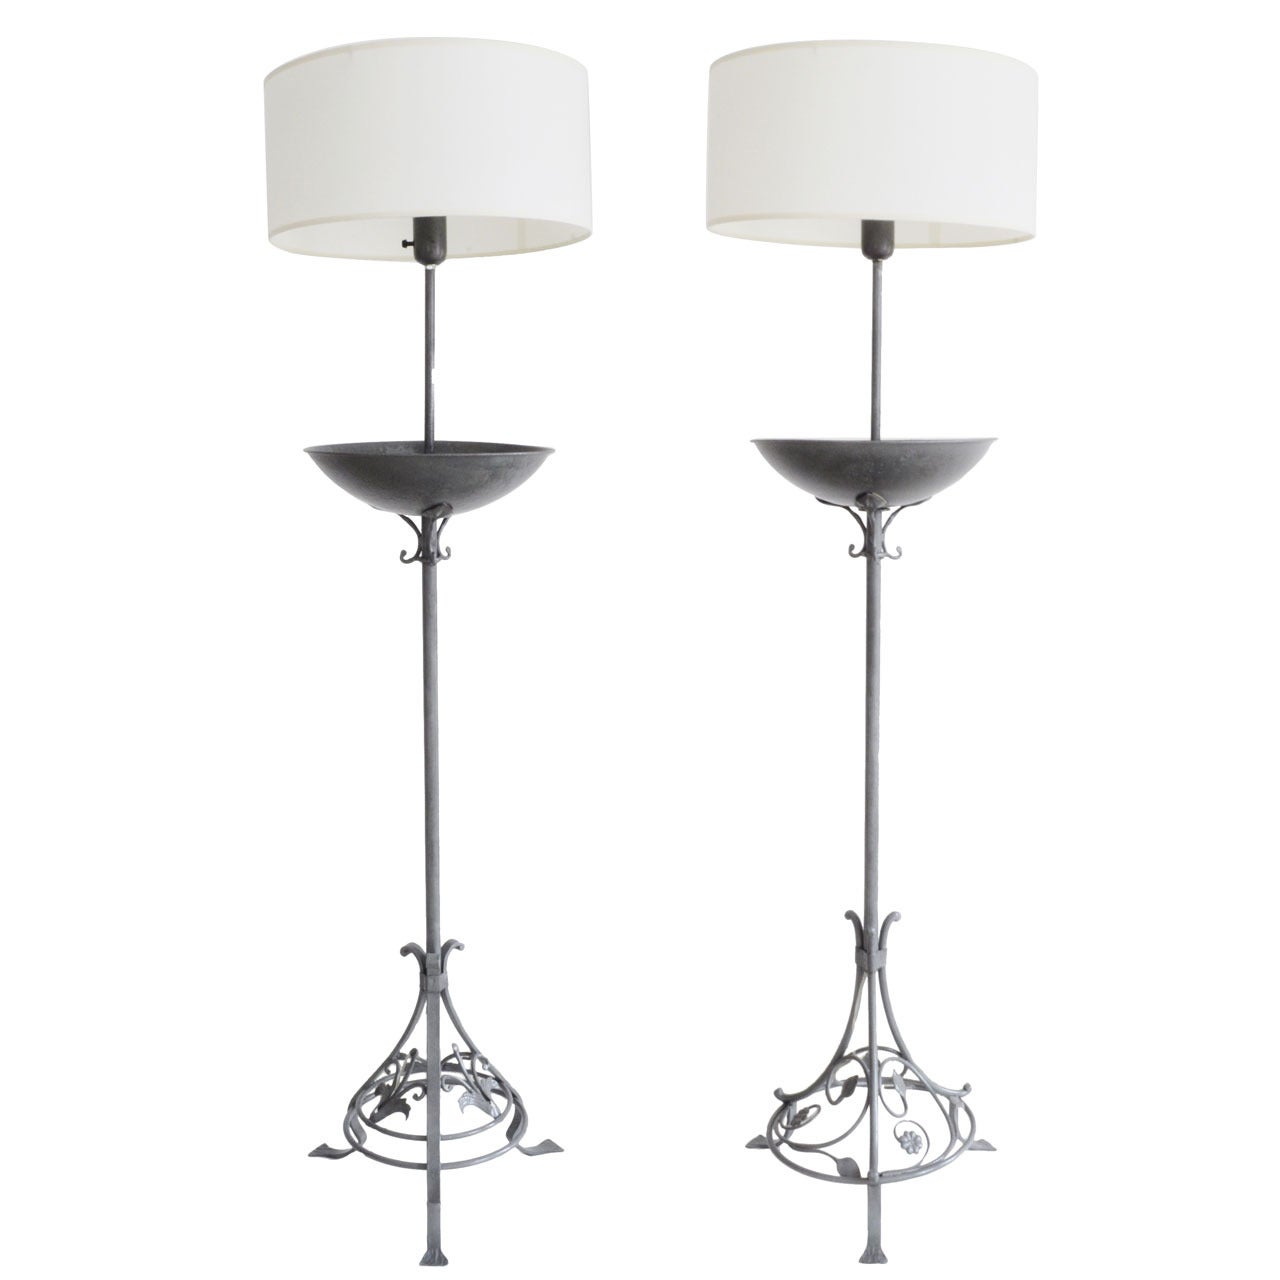 American Art Deco Pair of Wrought Iron Floor Lamps with Integral Jardinieres For Sale